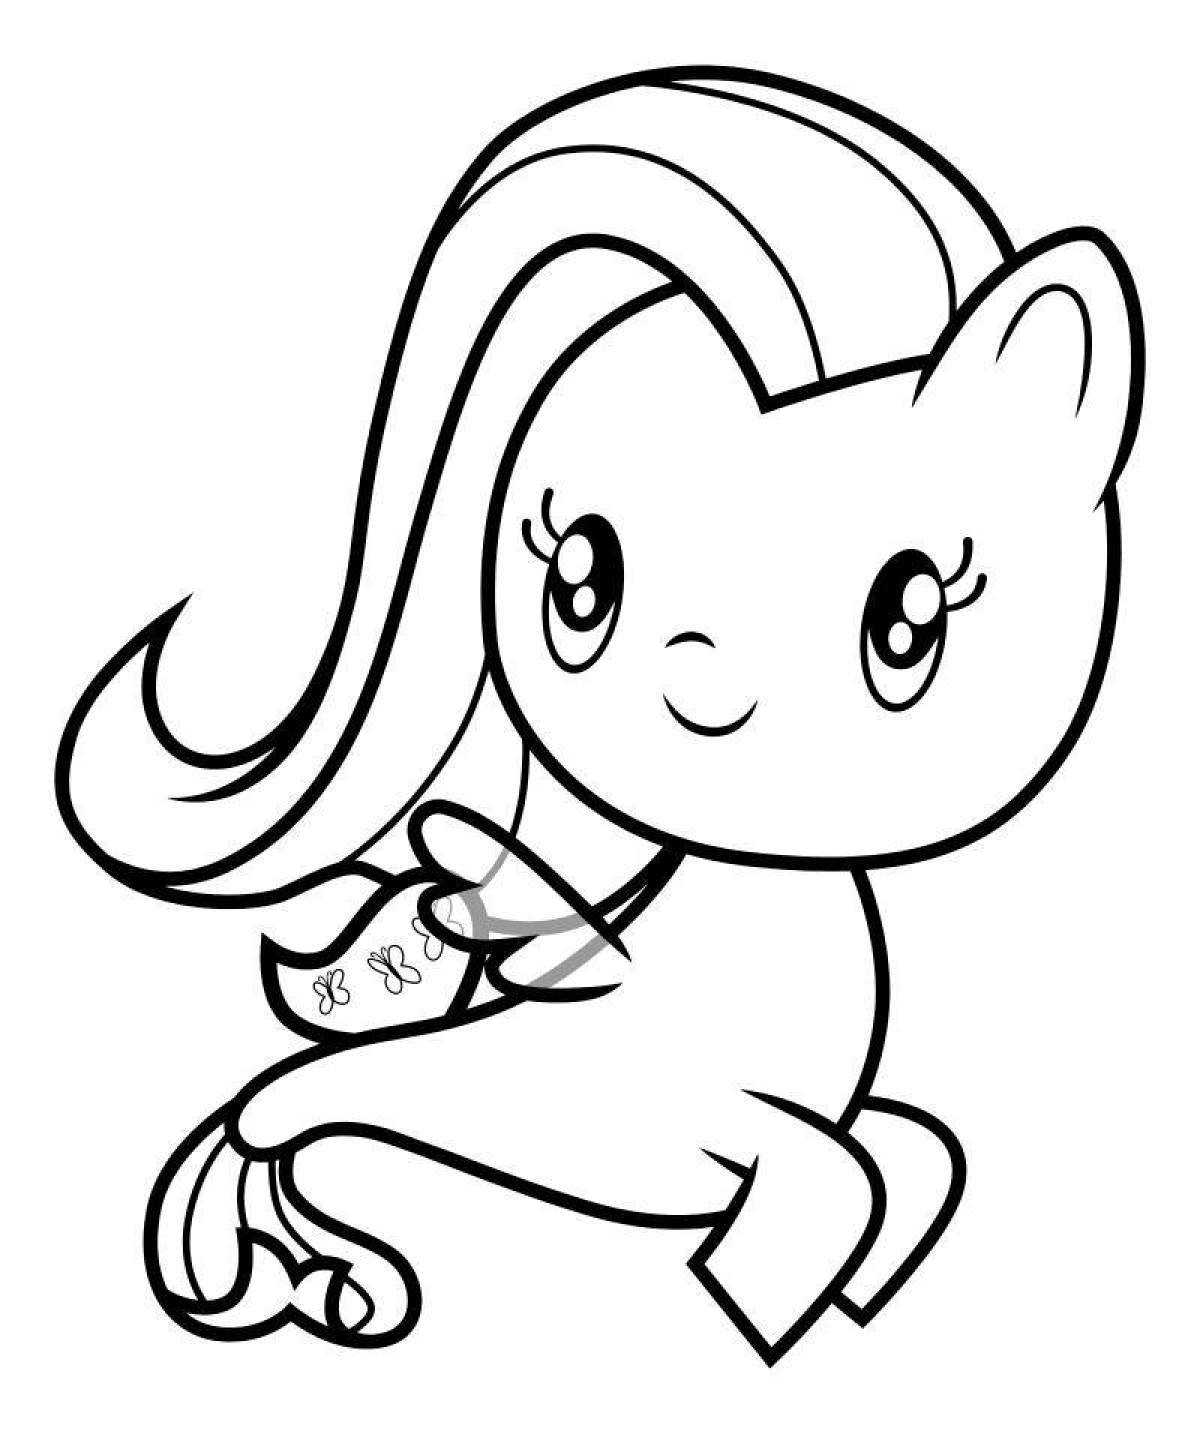 Coloring page gorgeous fluttershy pony